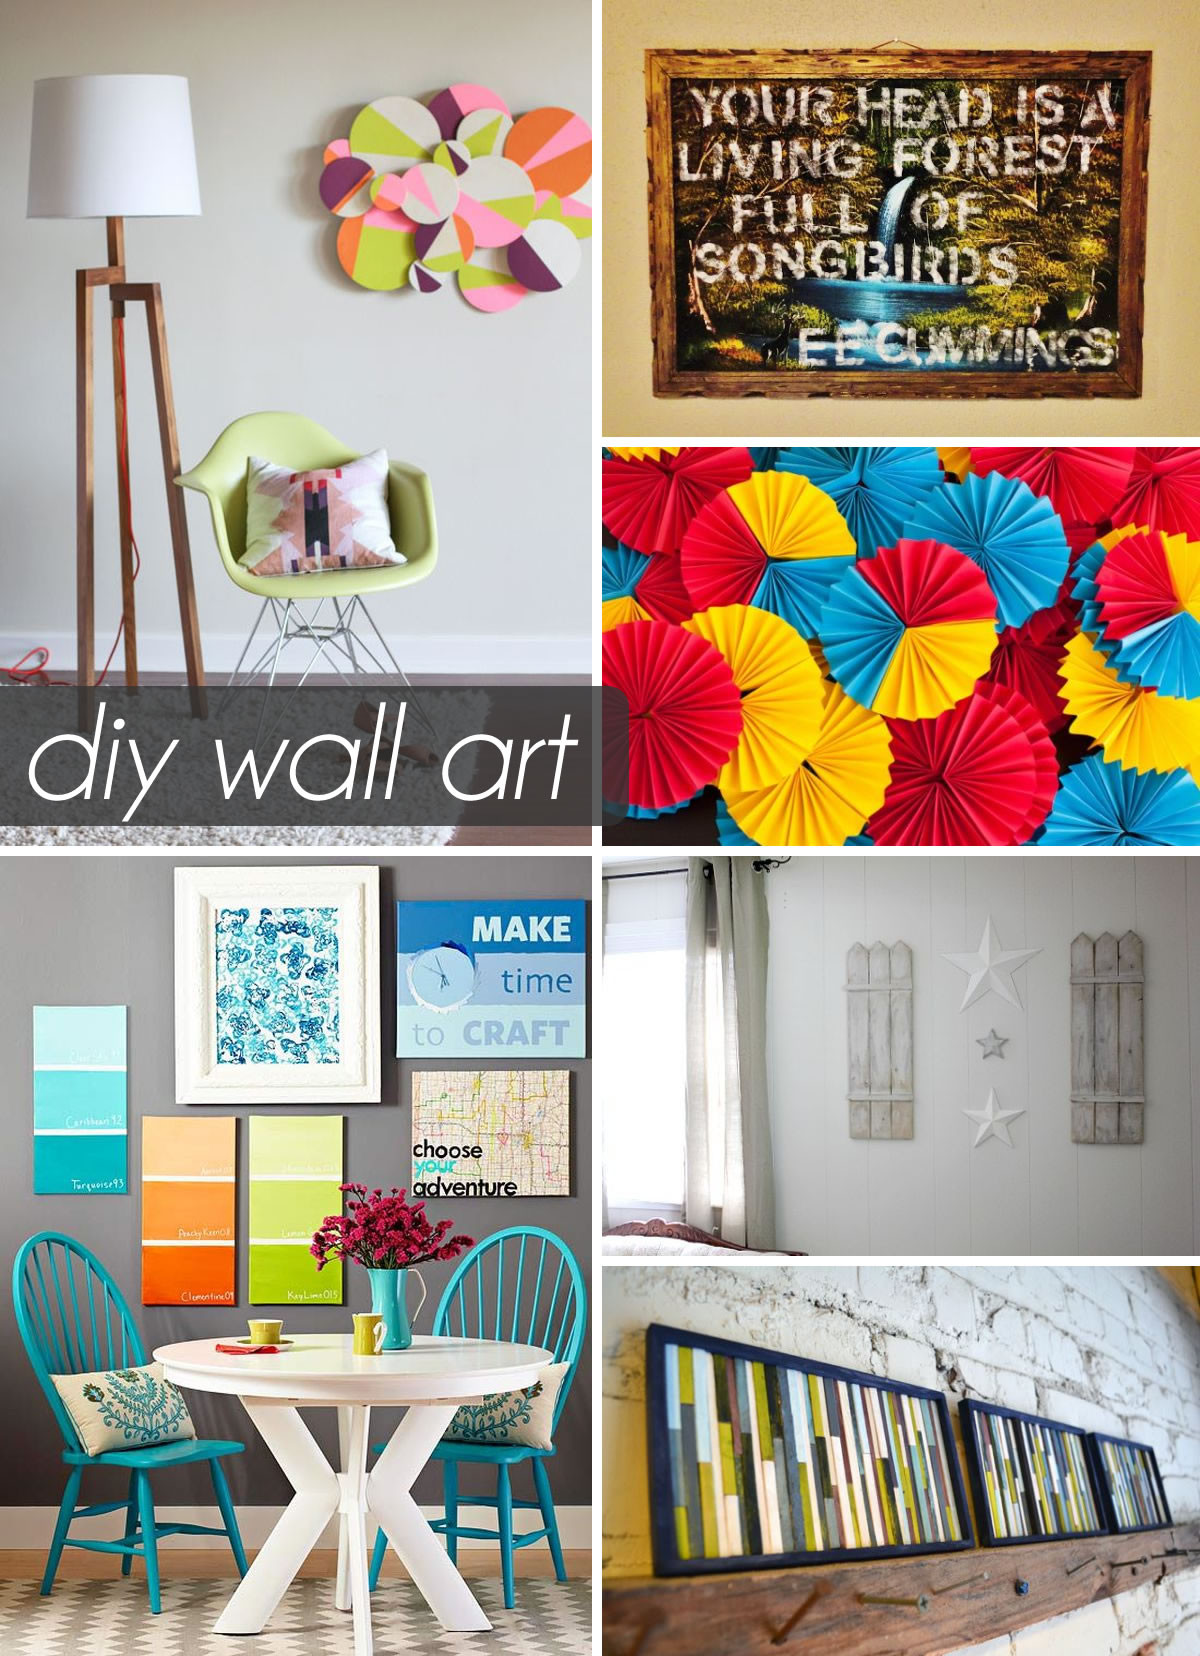 DIY Room Wall Decorations
 50 Beautiful DIY Wall Art Ideas For Your Home